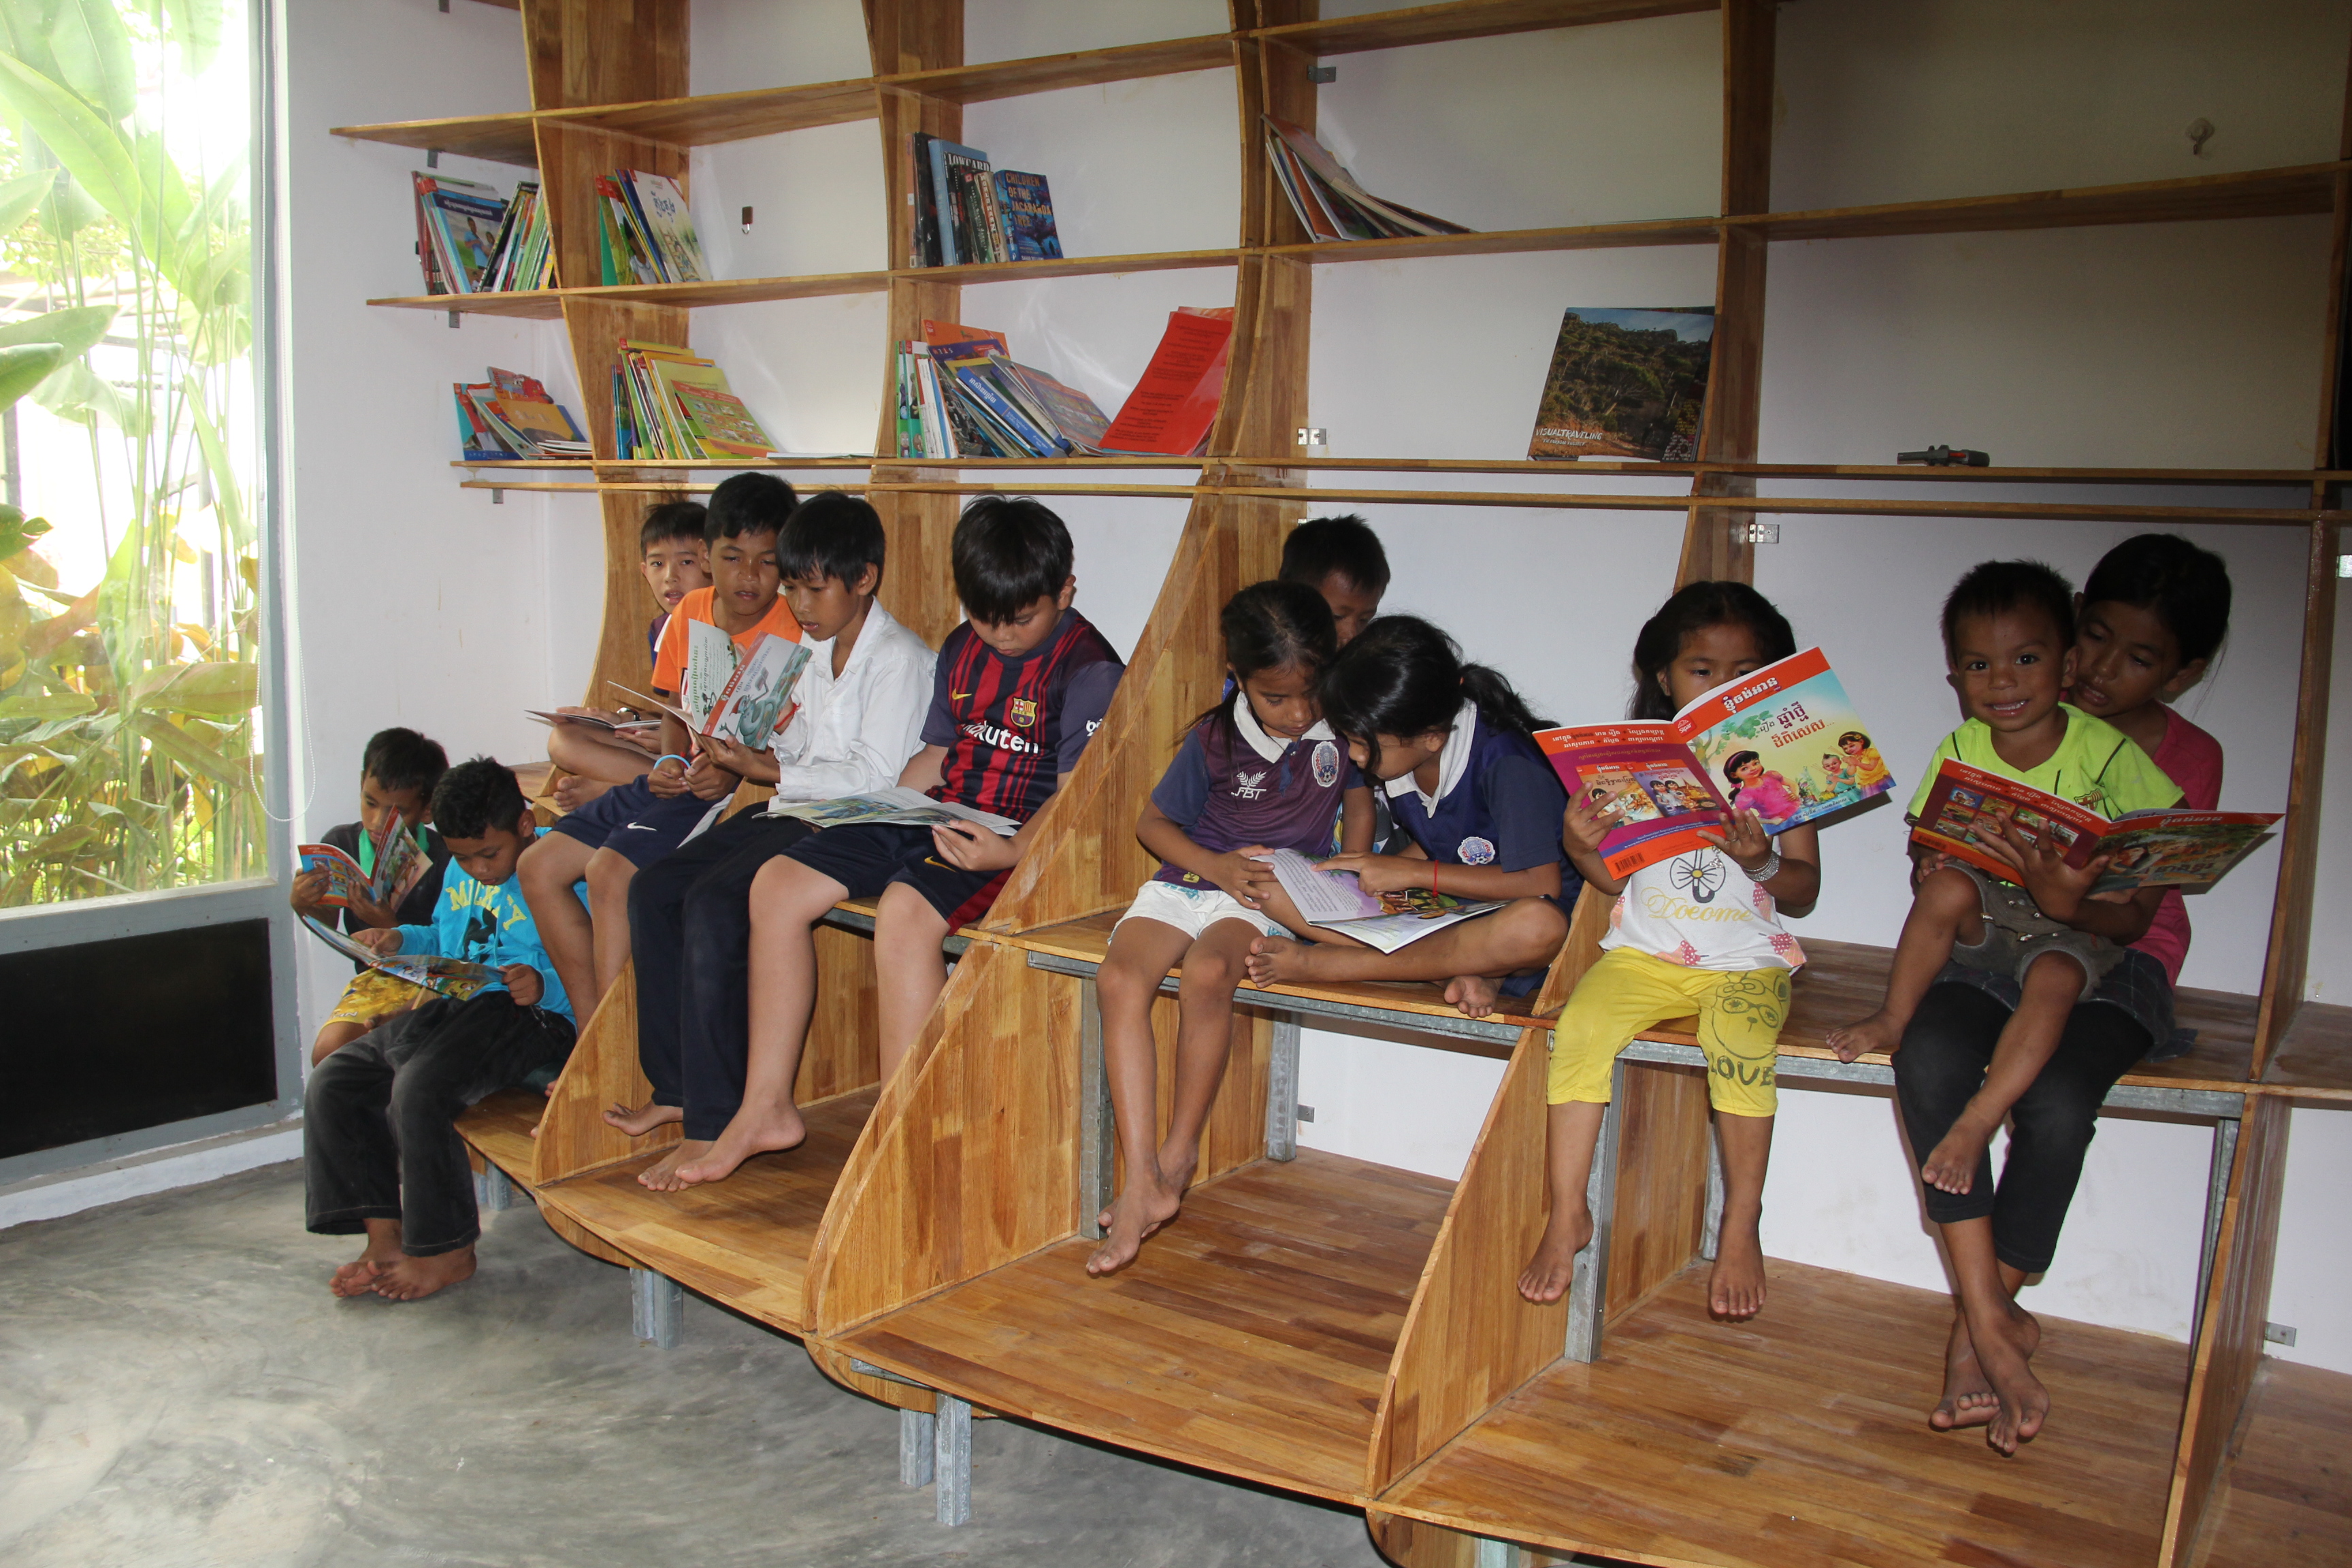 Reading in the library in Phnom Penh